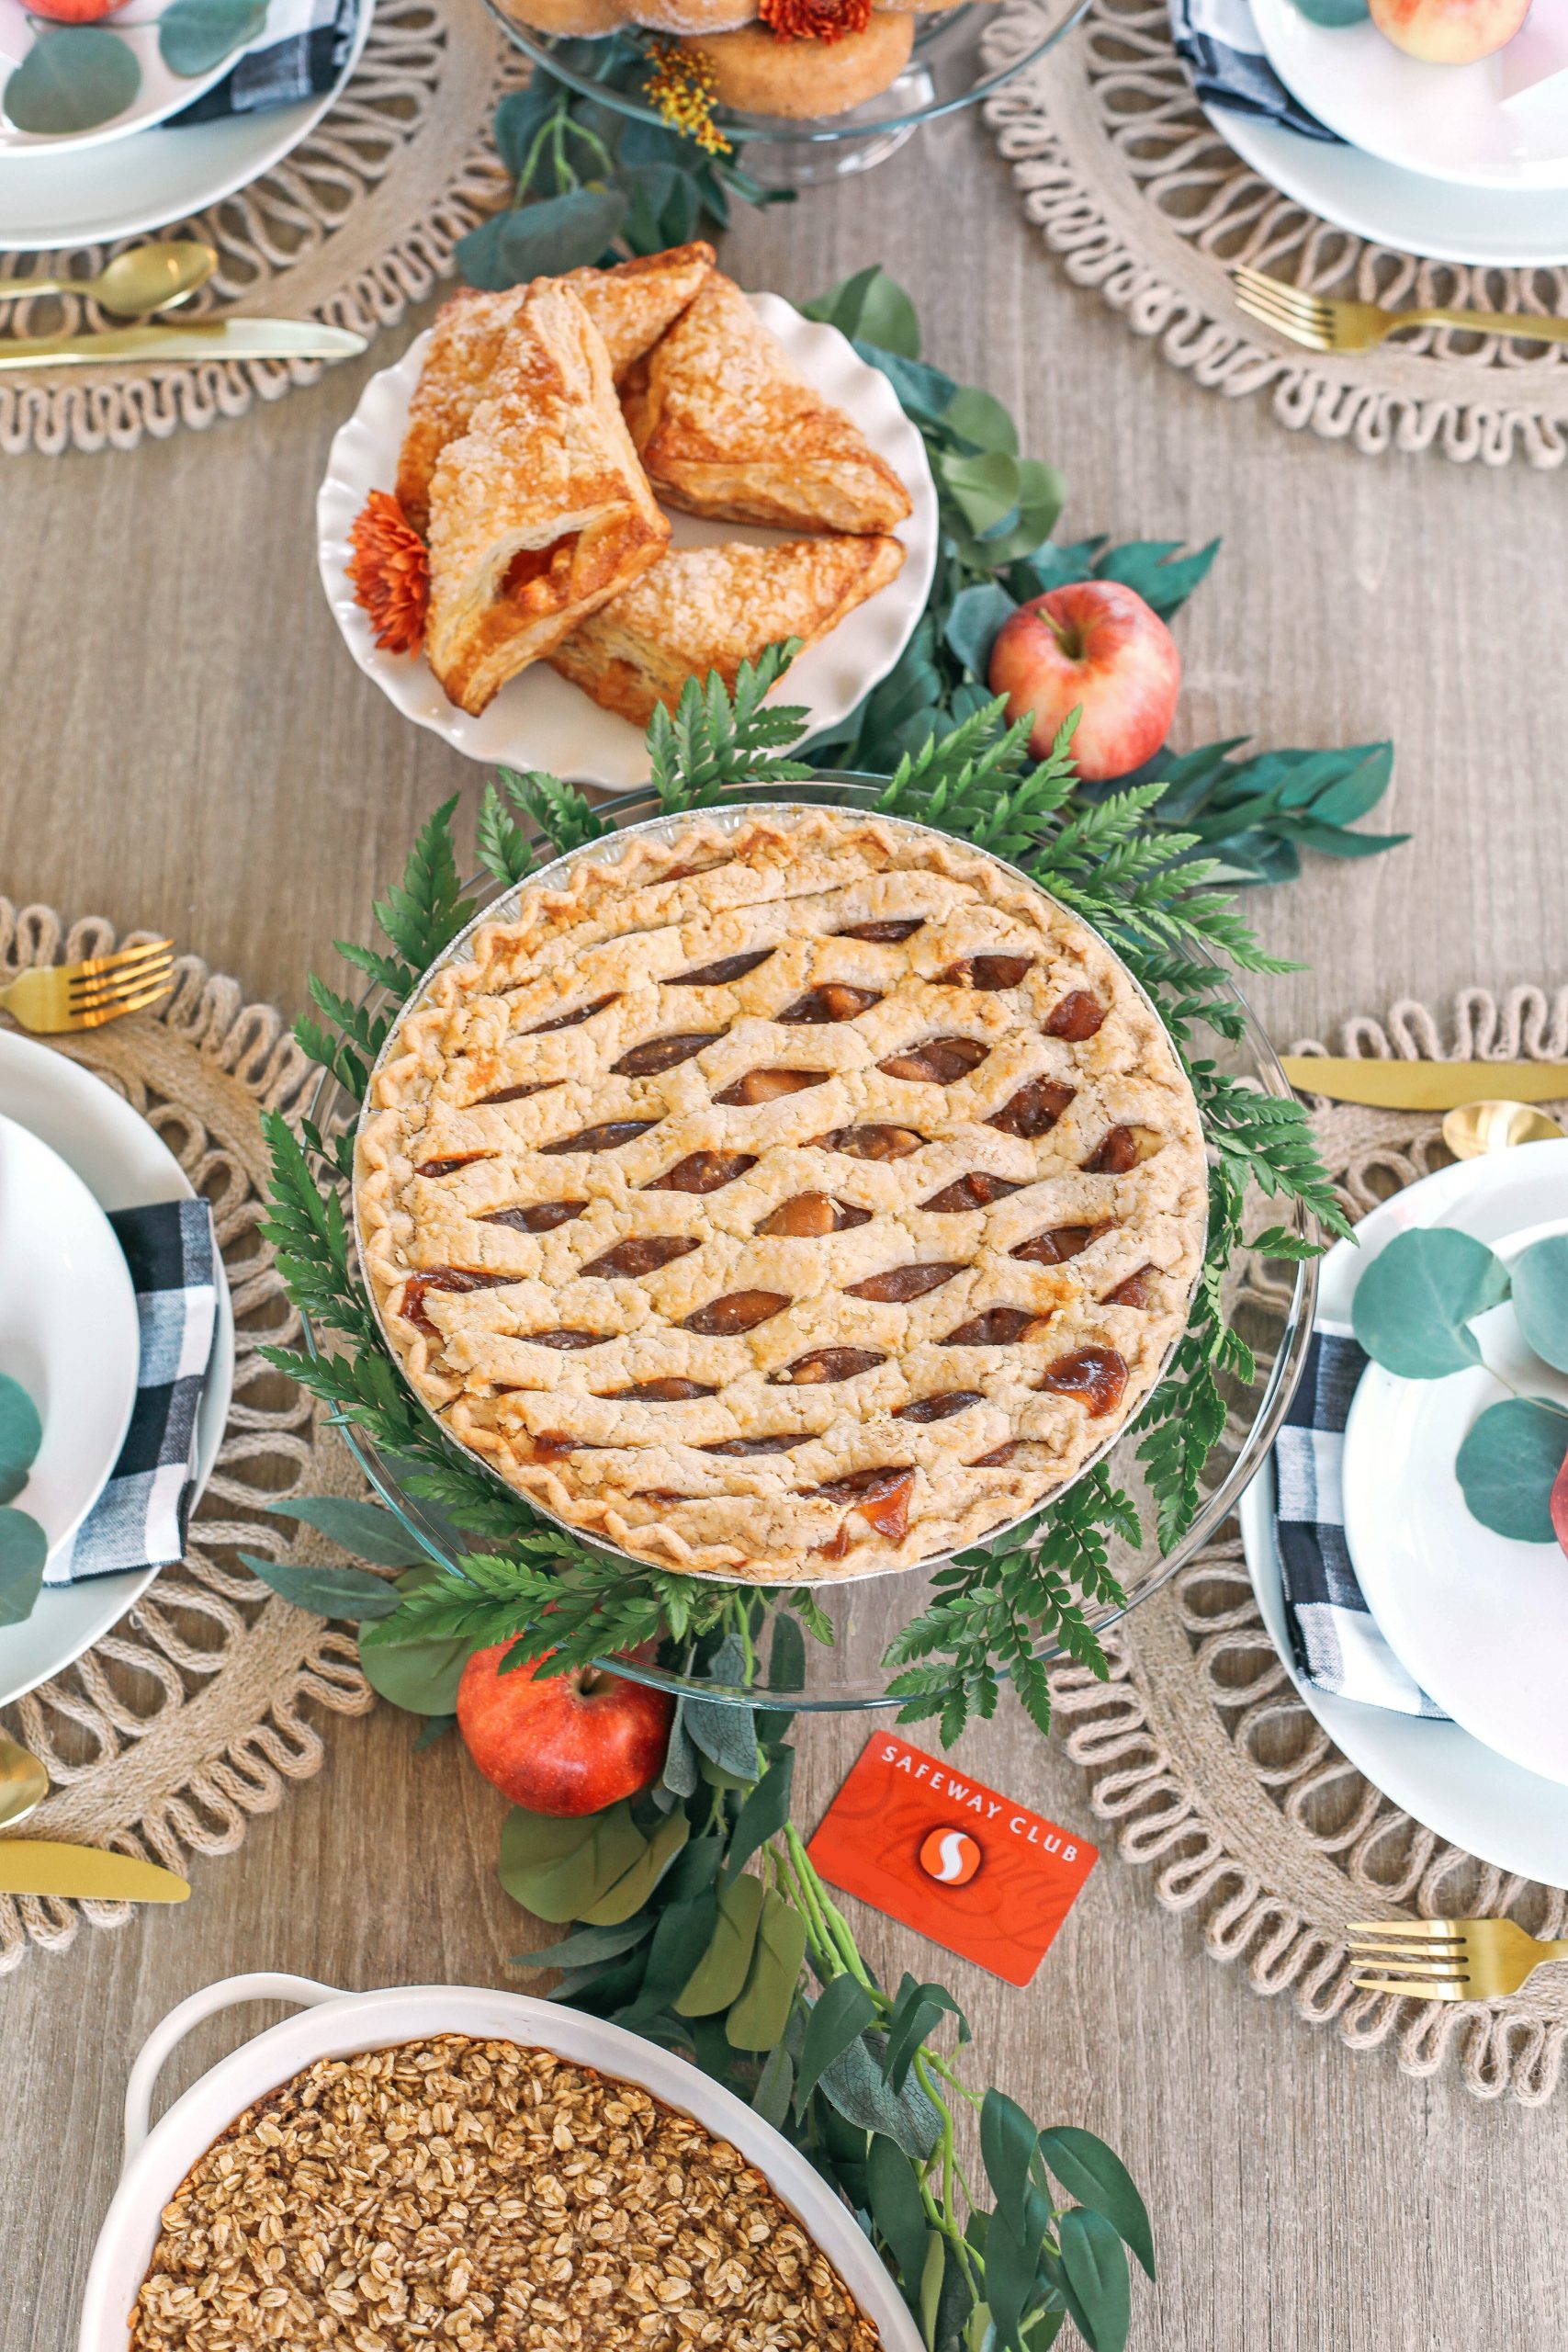 Whether hosting family this holiday or throwing together a quick brunch, here are some fun tips for creating a beautiful fall-inspired table!